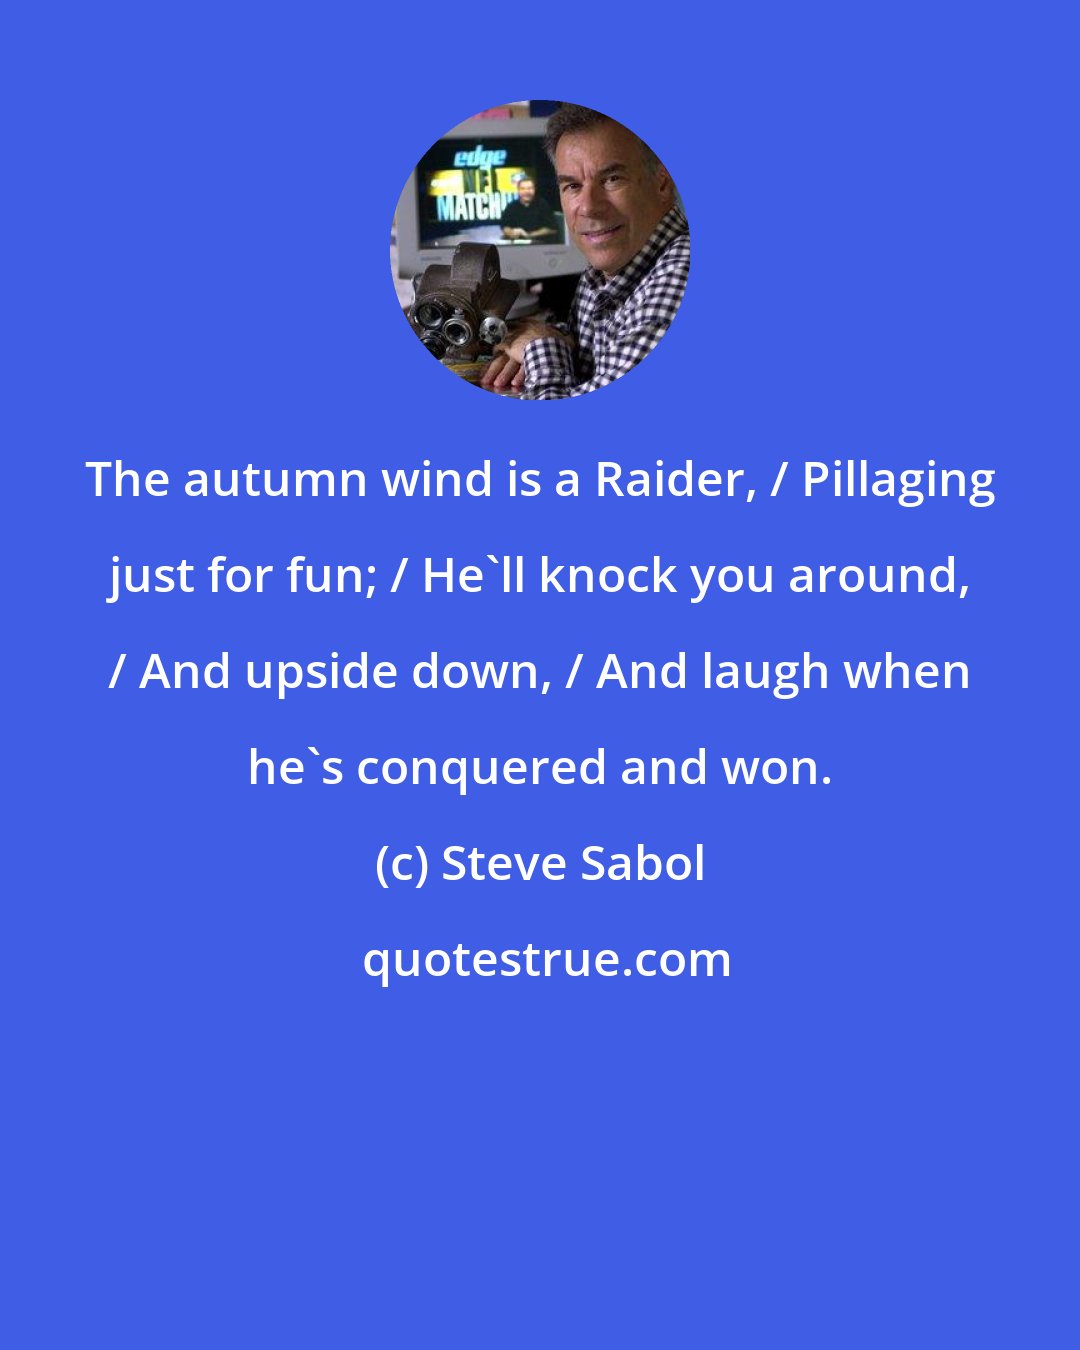 Steve Sabol: The autumn wind is a Raider, / Pillaging just for fun; / He'll knock you around, / And upside down, / And laugh when he's conquered and won.